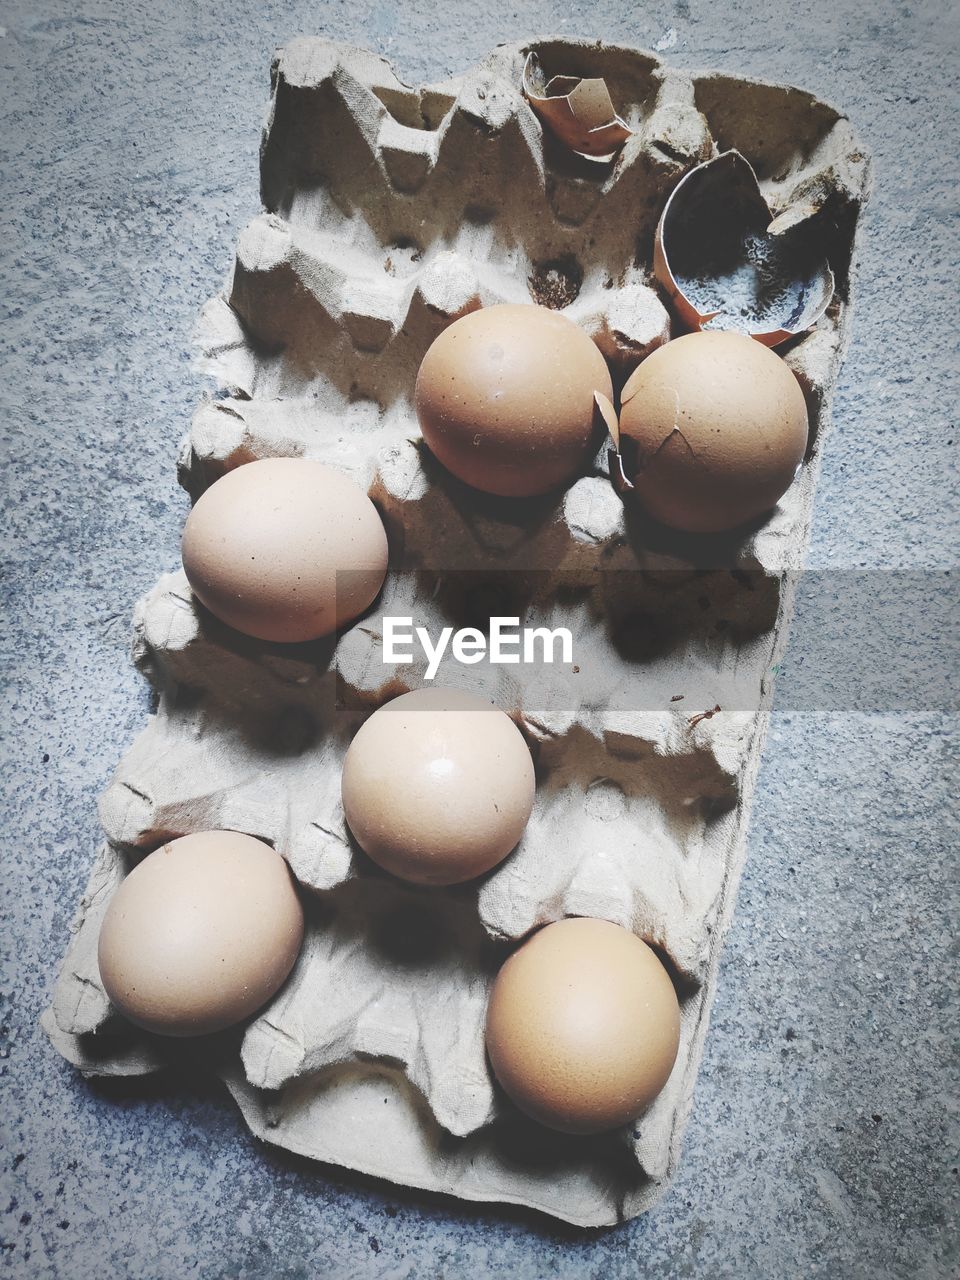 HIGH ANGLE VIEW OF EGGS ON FLOOR